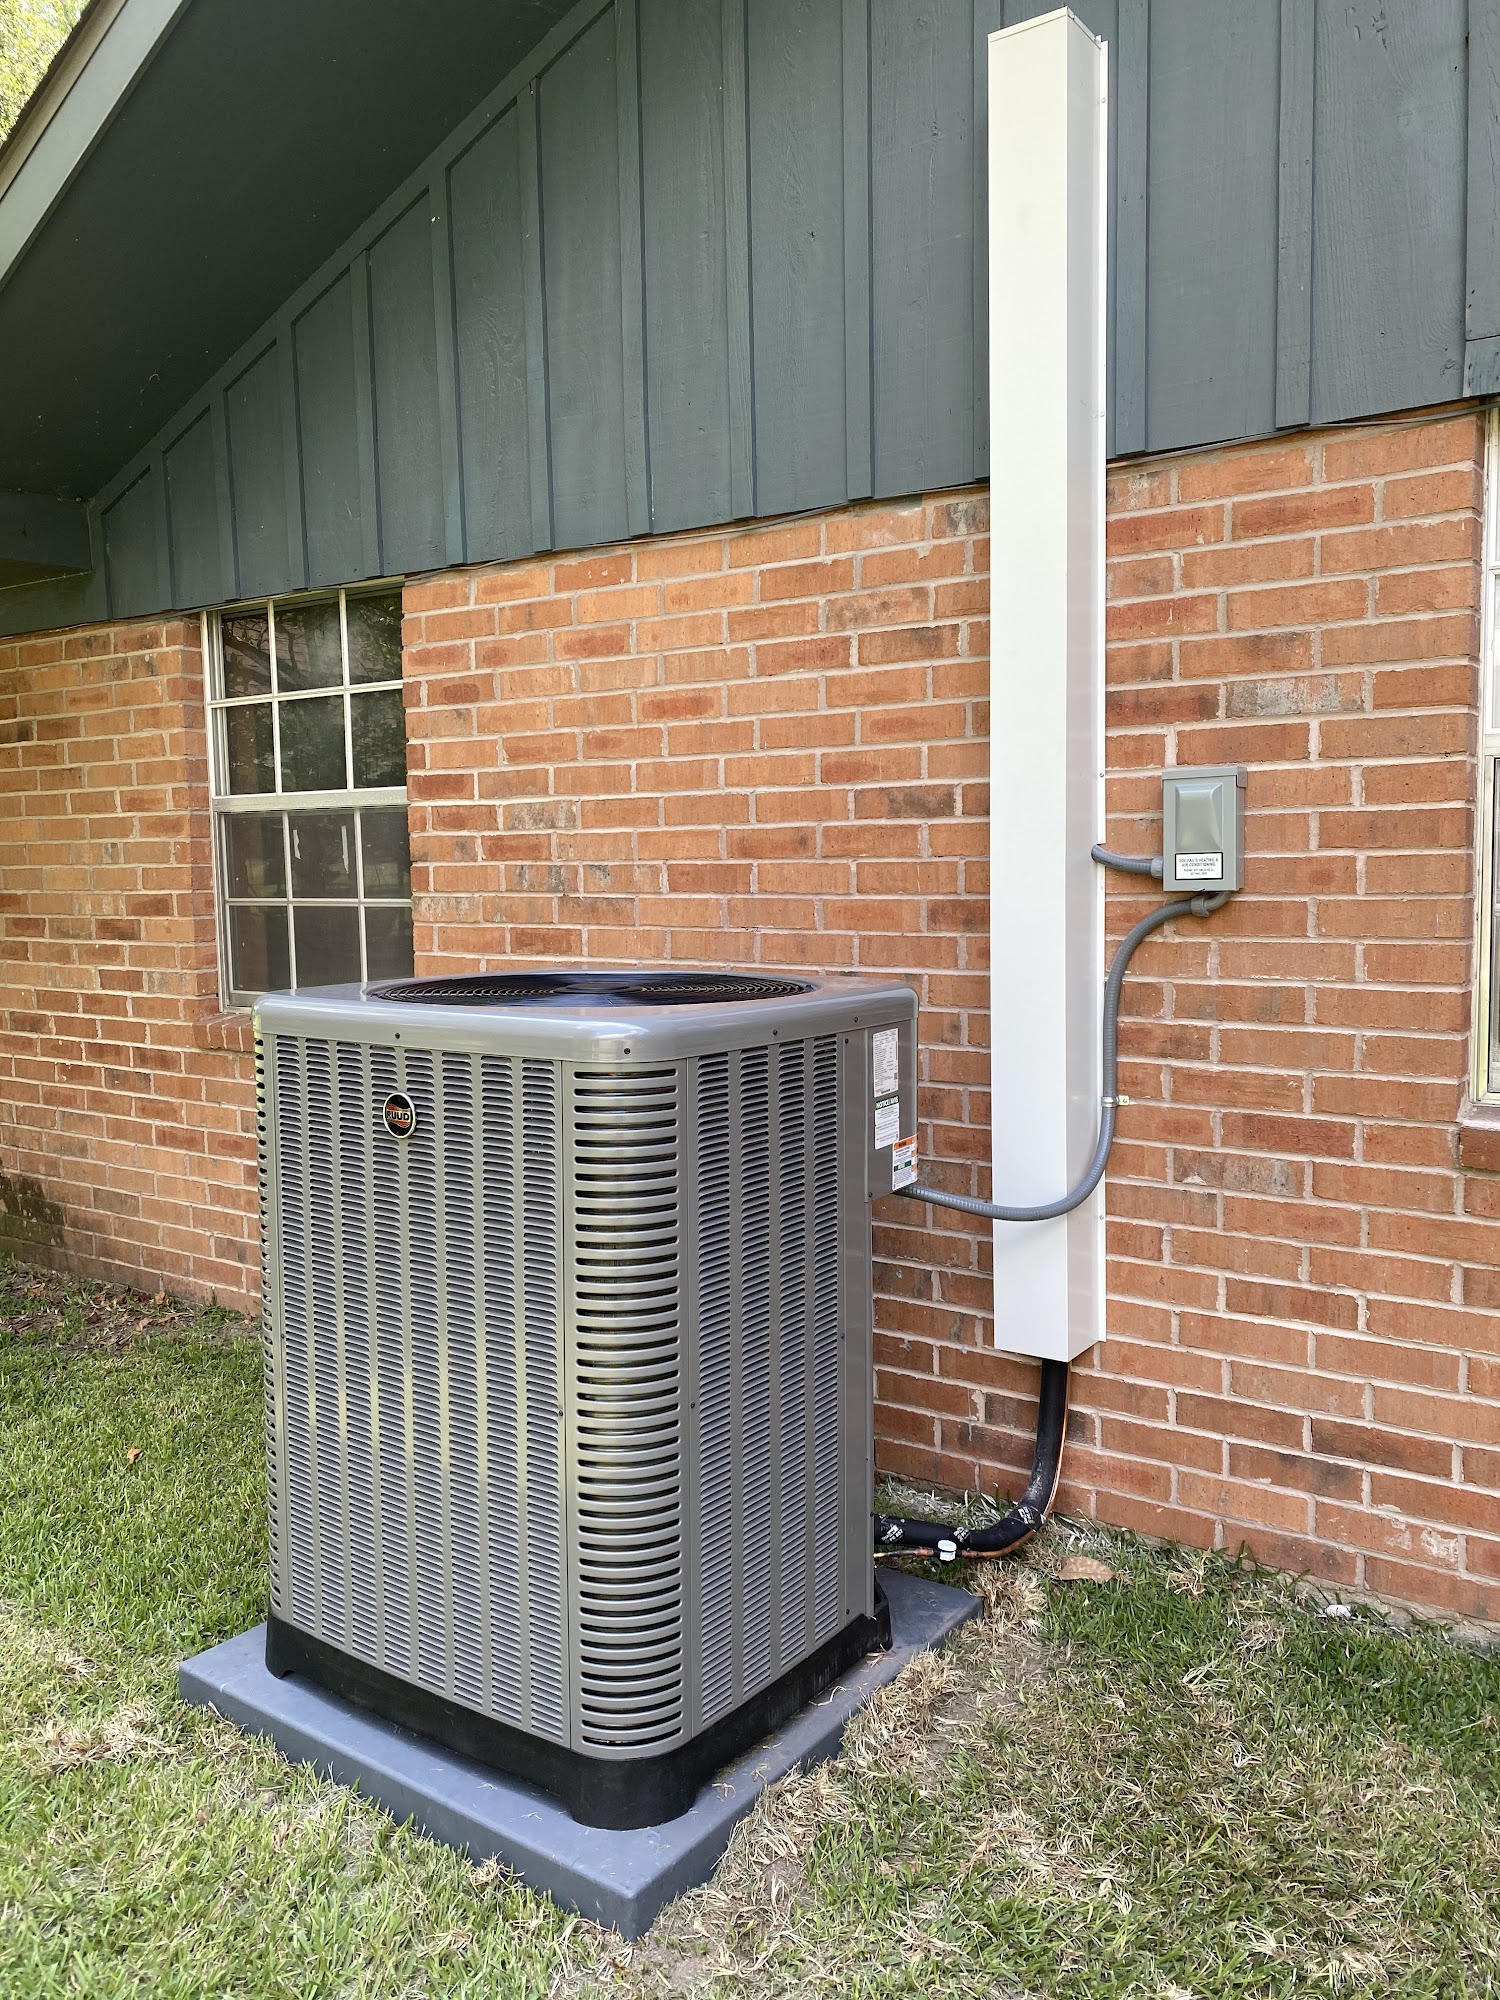 Soileau's Heating & Air Conditioning 233 Pawnee St, Port Barre Louisiana 70577